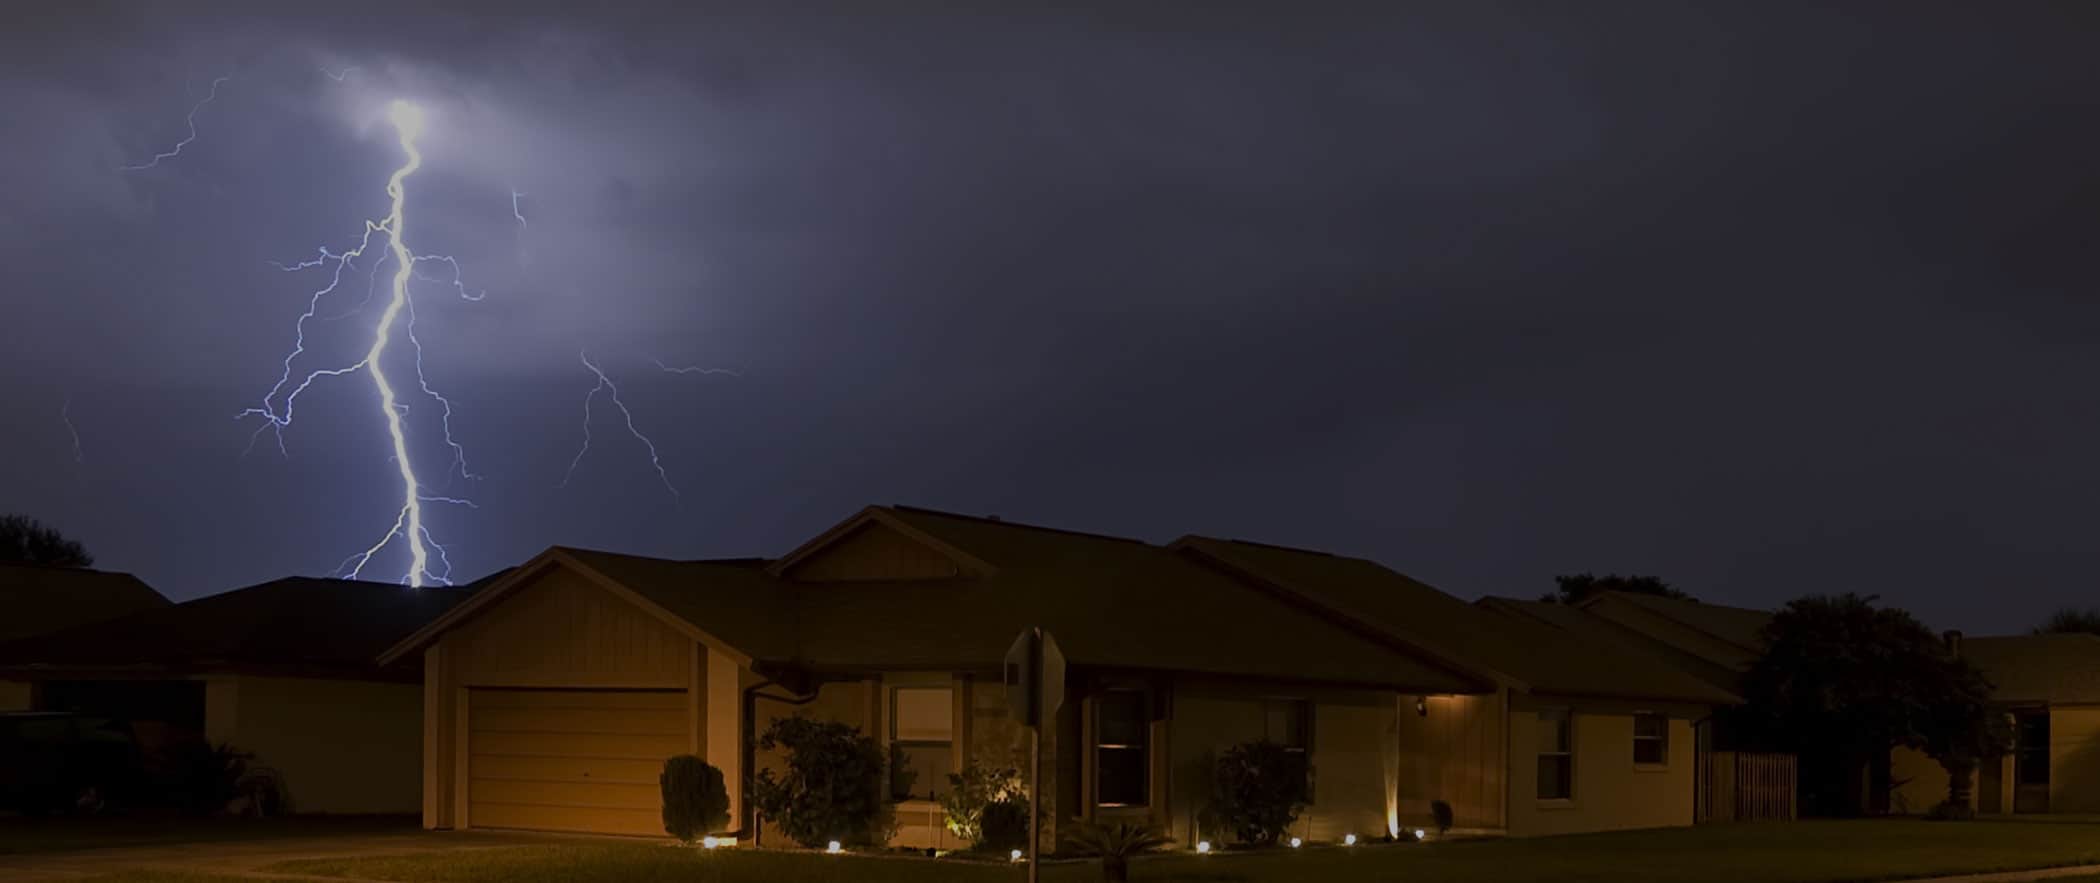 Lightning Strikes a Home During a Severe Storm